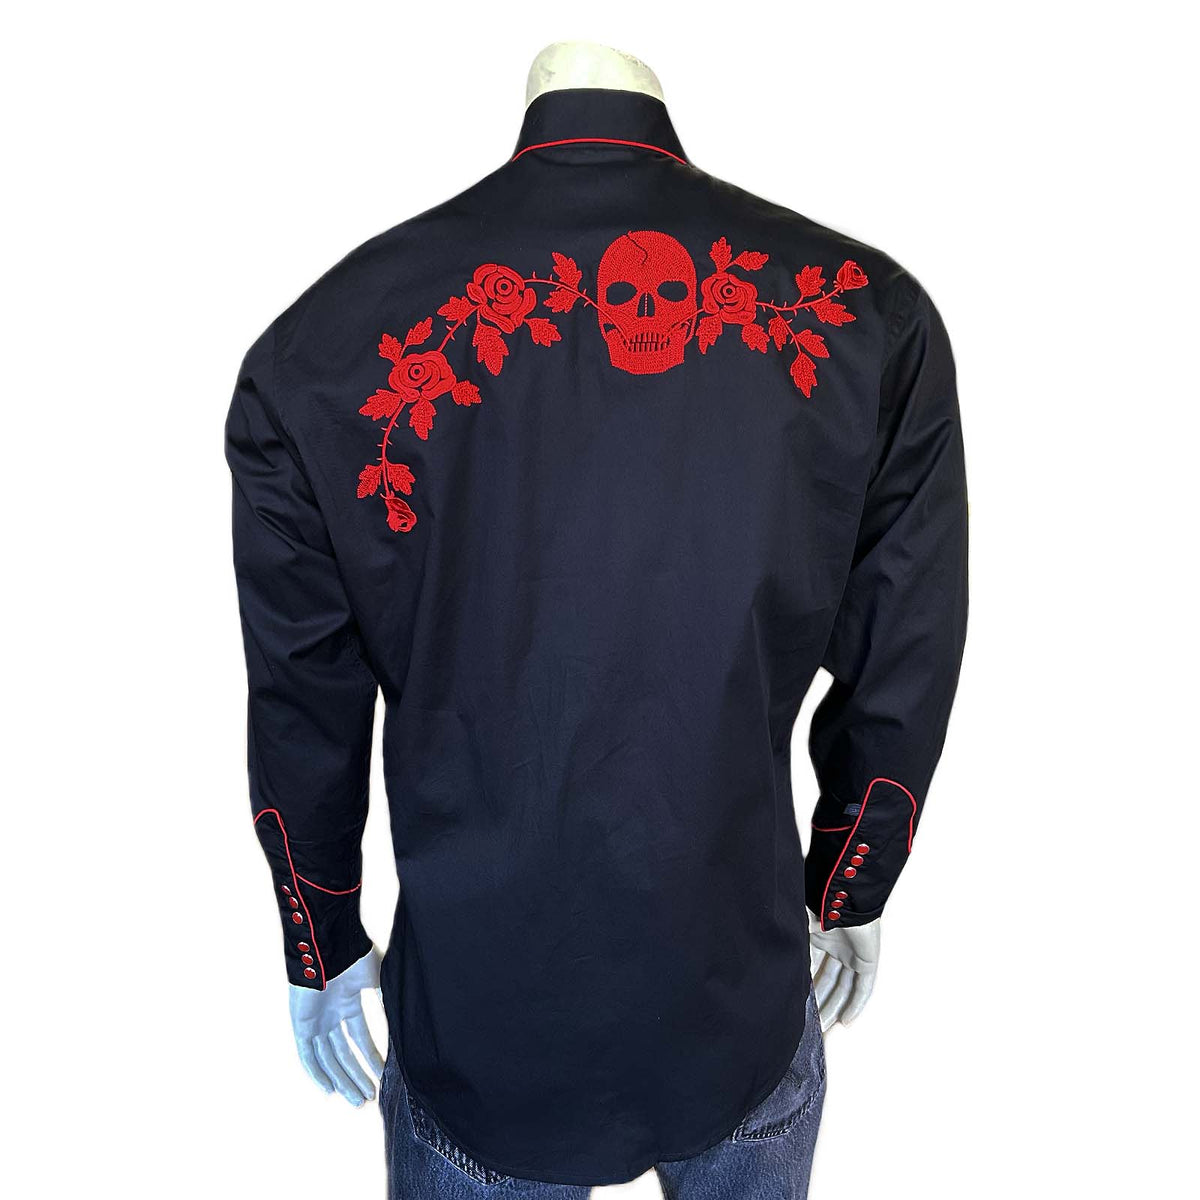 Men’s Vintage Black Skull & Roses Chain Stitch Embroidery Western Shirt